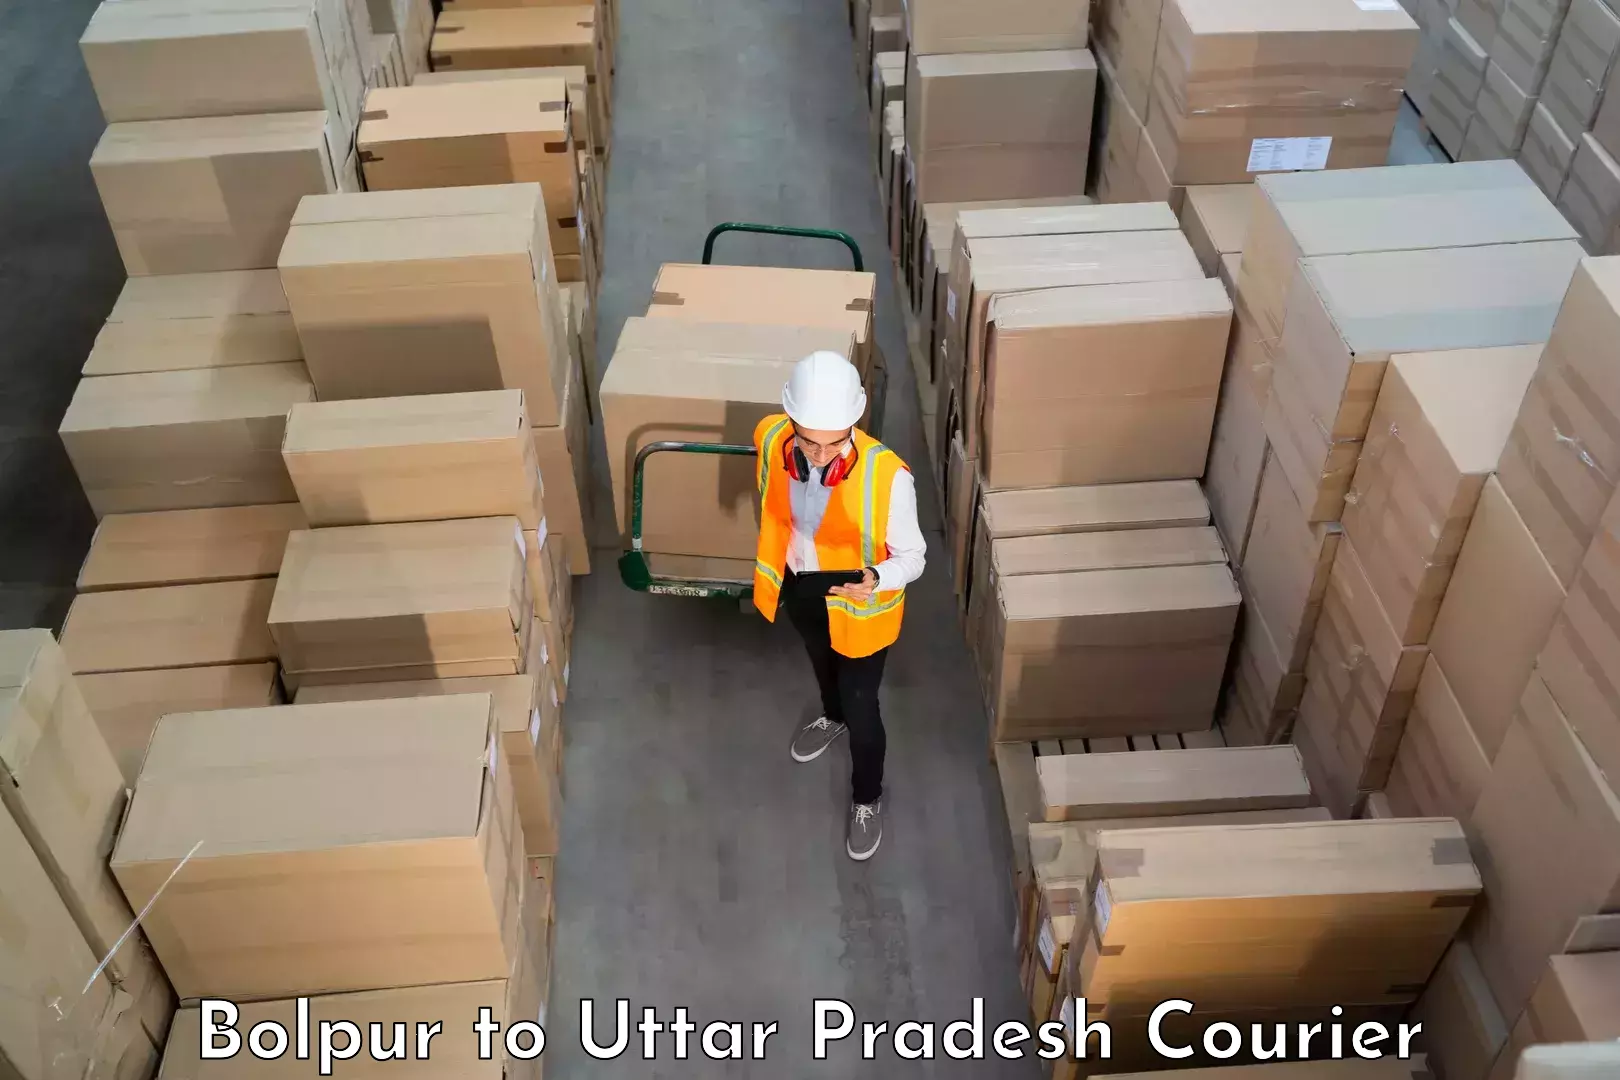 Hassle-free relocation Bolpur to Lalitpur